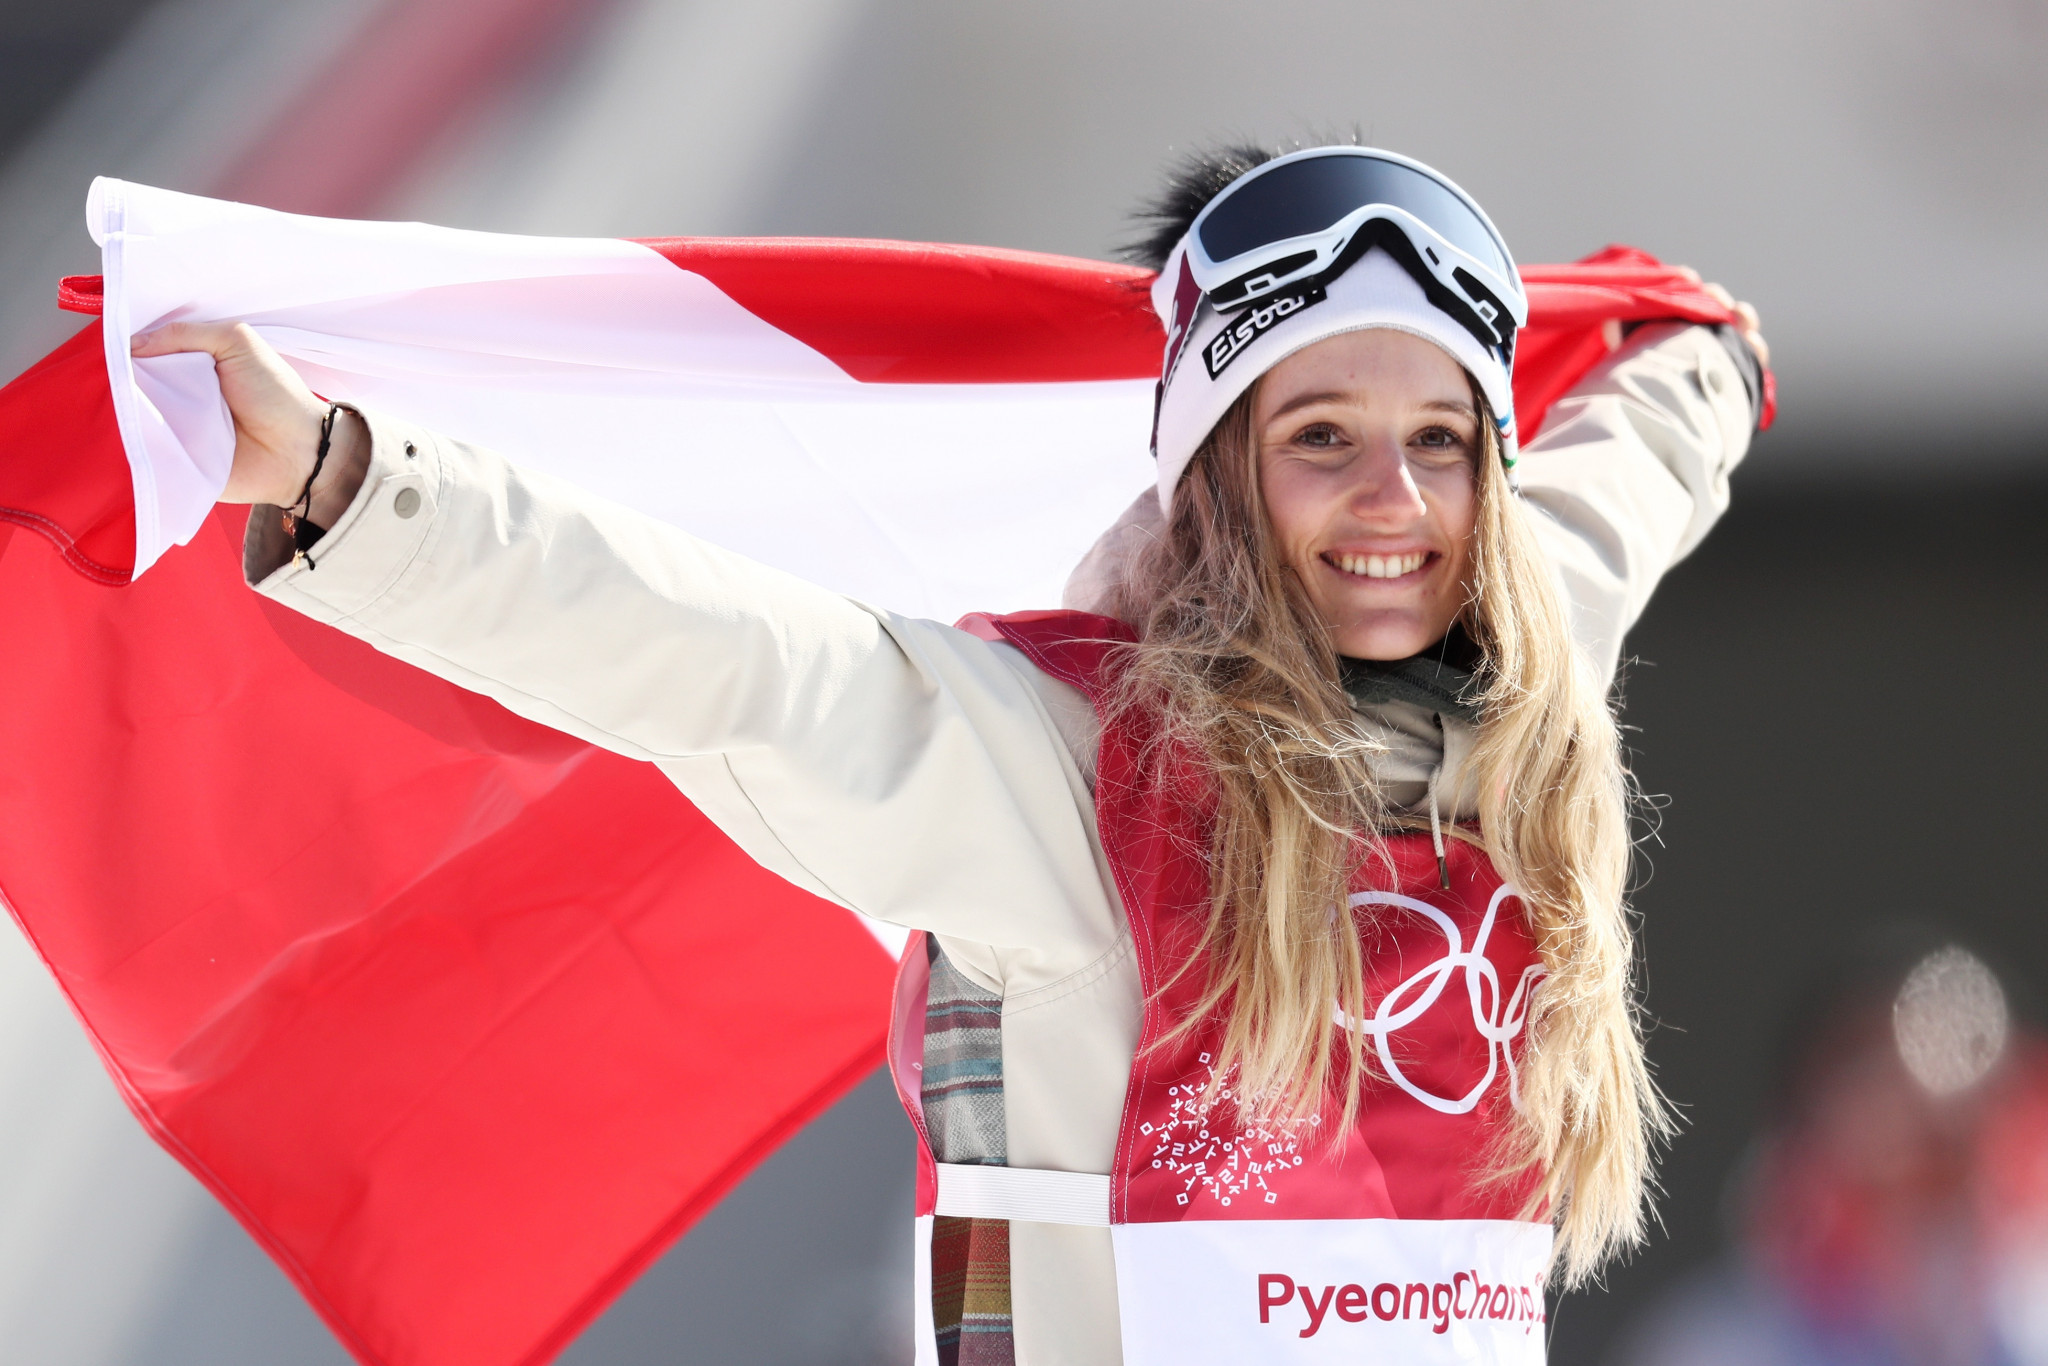 Austria's Gasser wins first-ever Olympic big air snowboard gold medal at Pyeongchang 2018